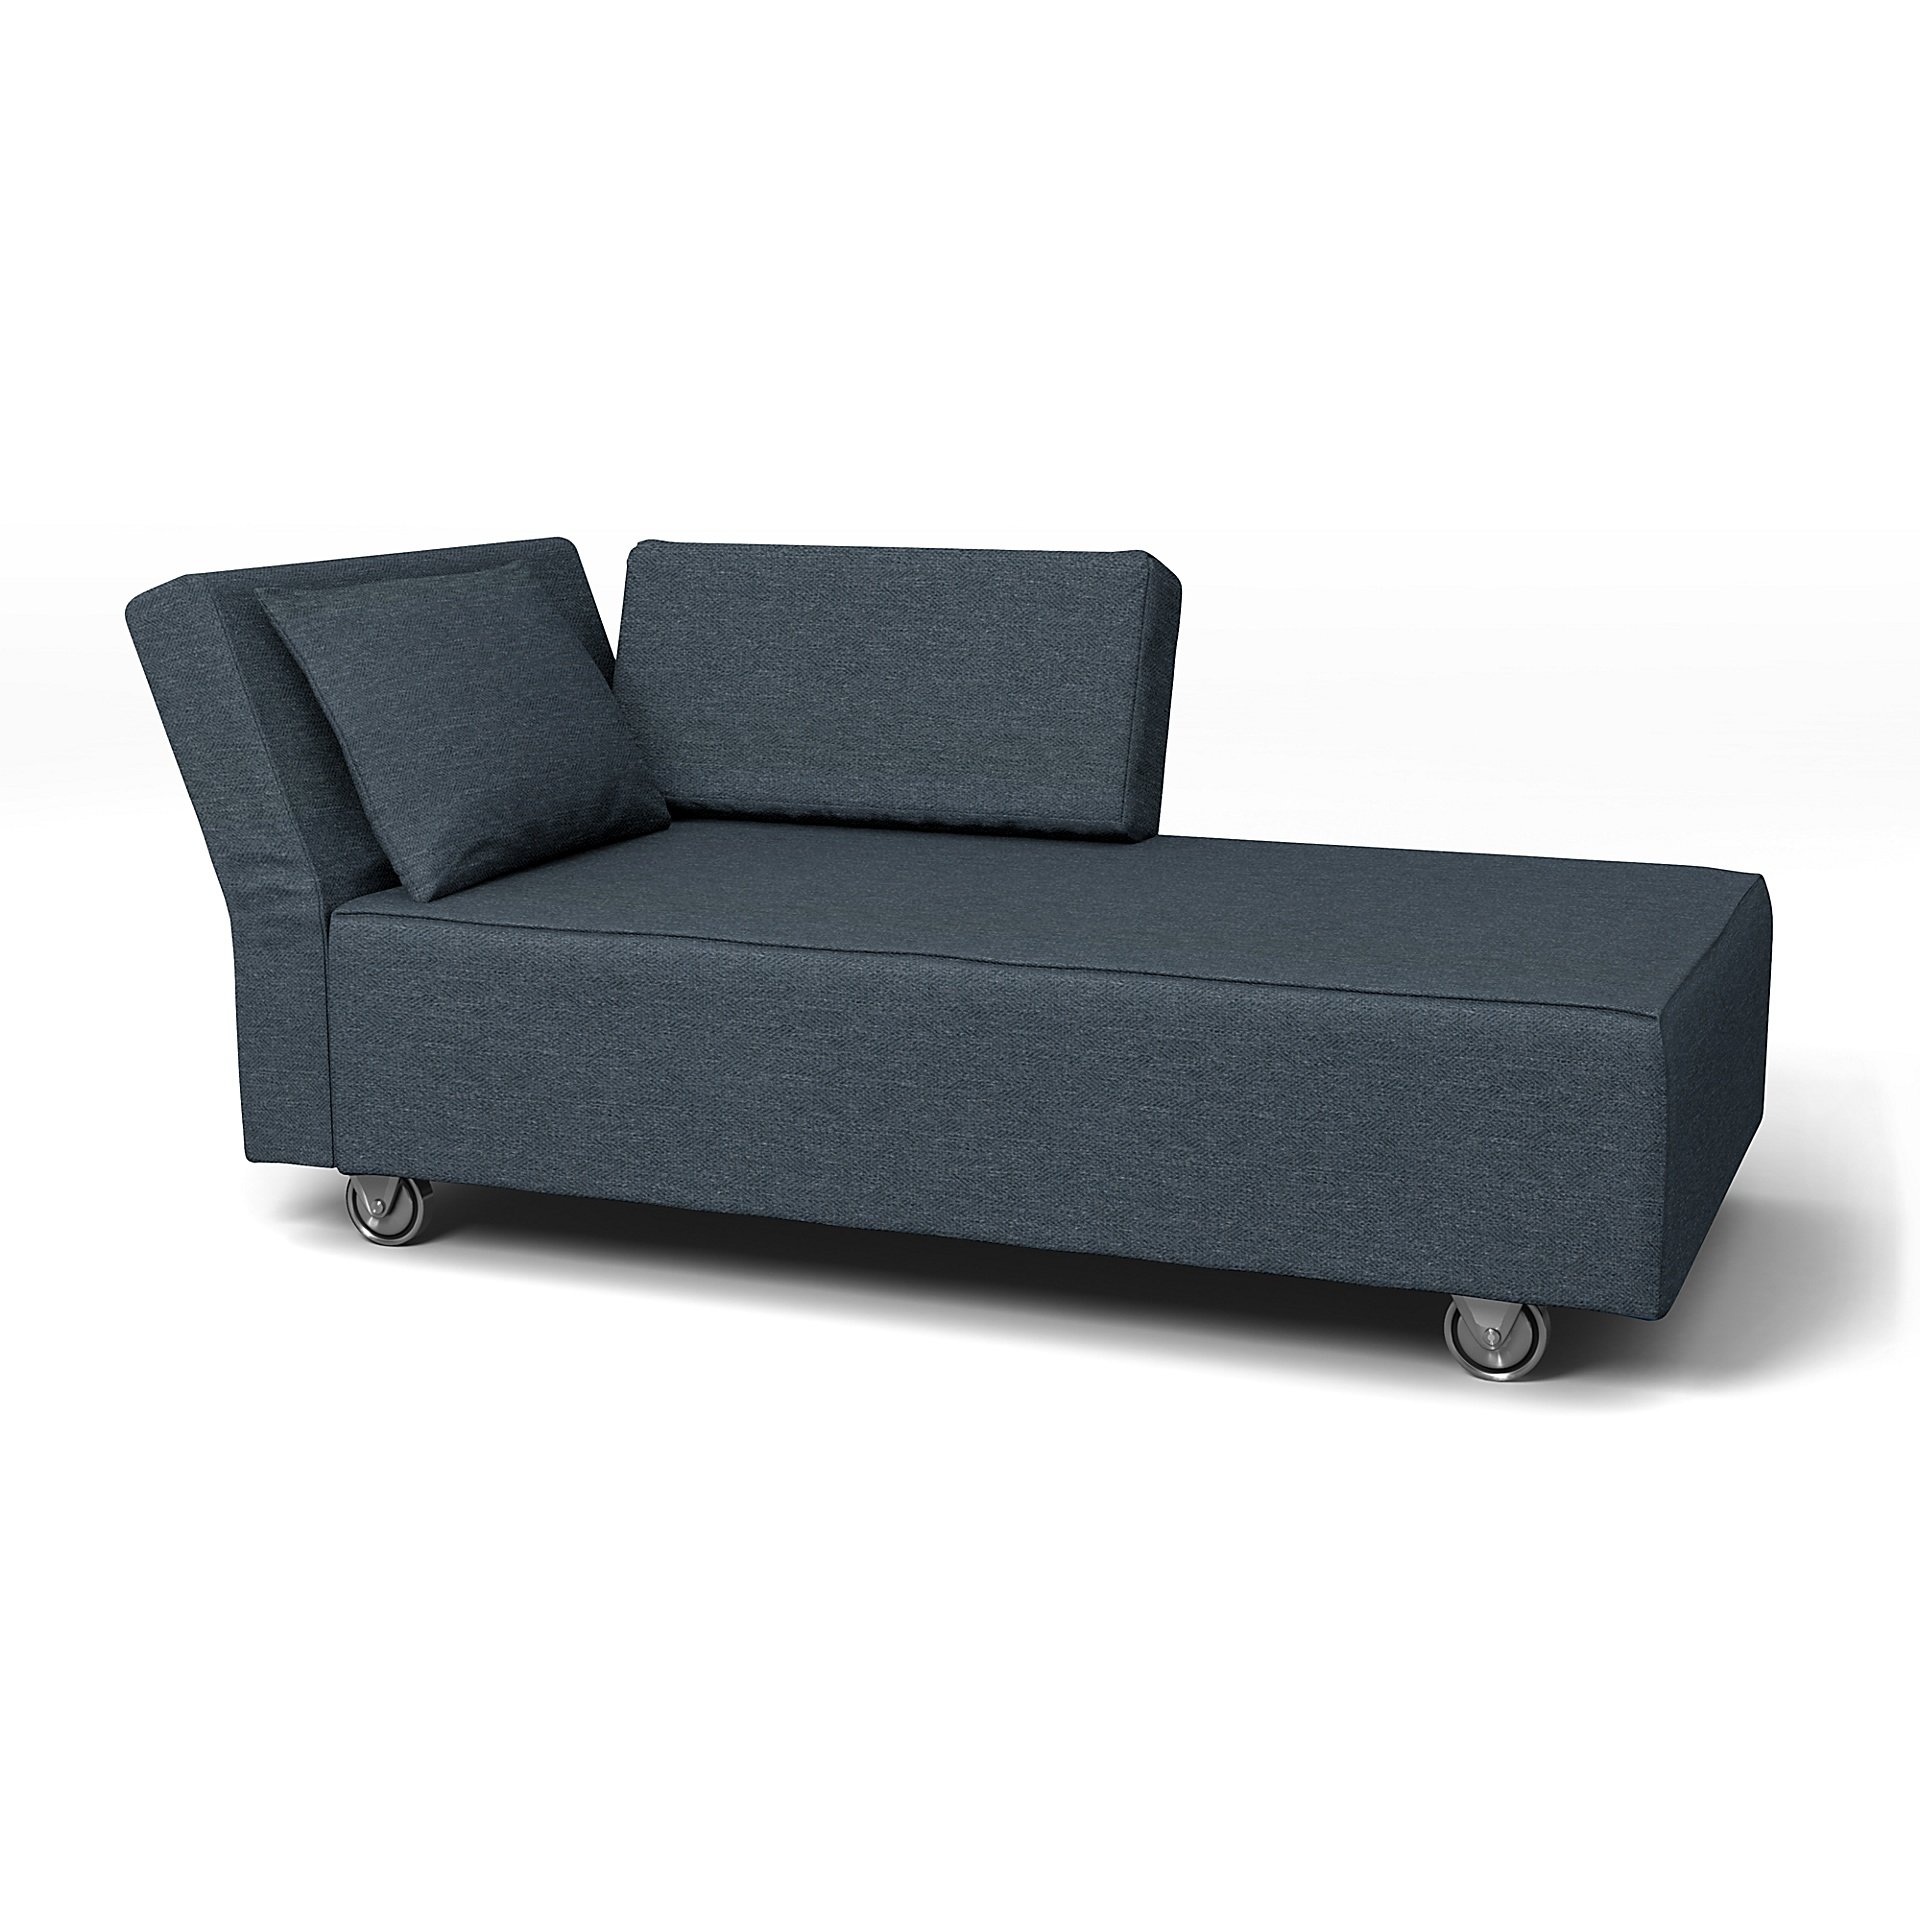 IKEA - Falsterbo Chaise with Left Armrest Cover, Denim, Boucle & Texture - Bemz